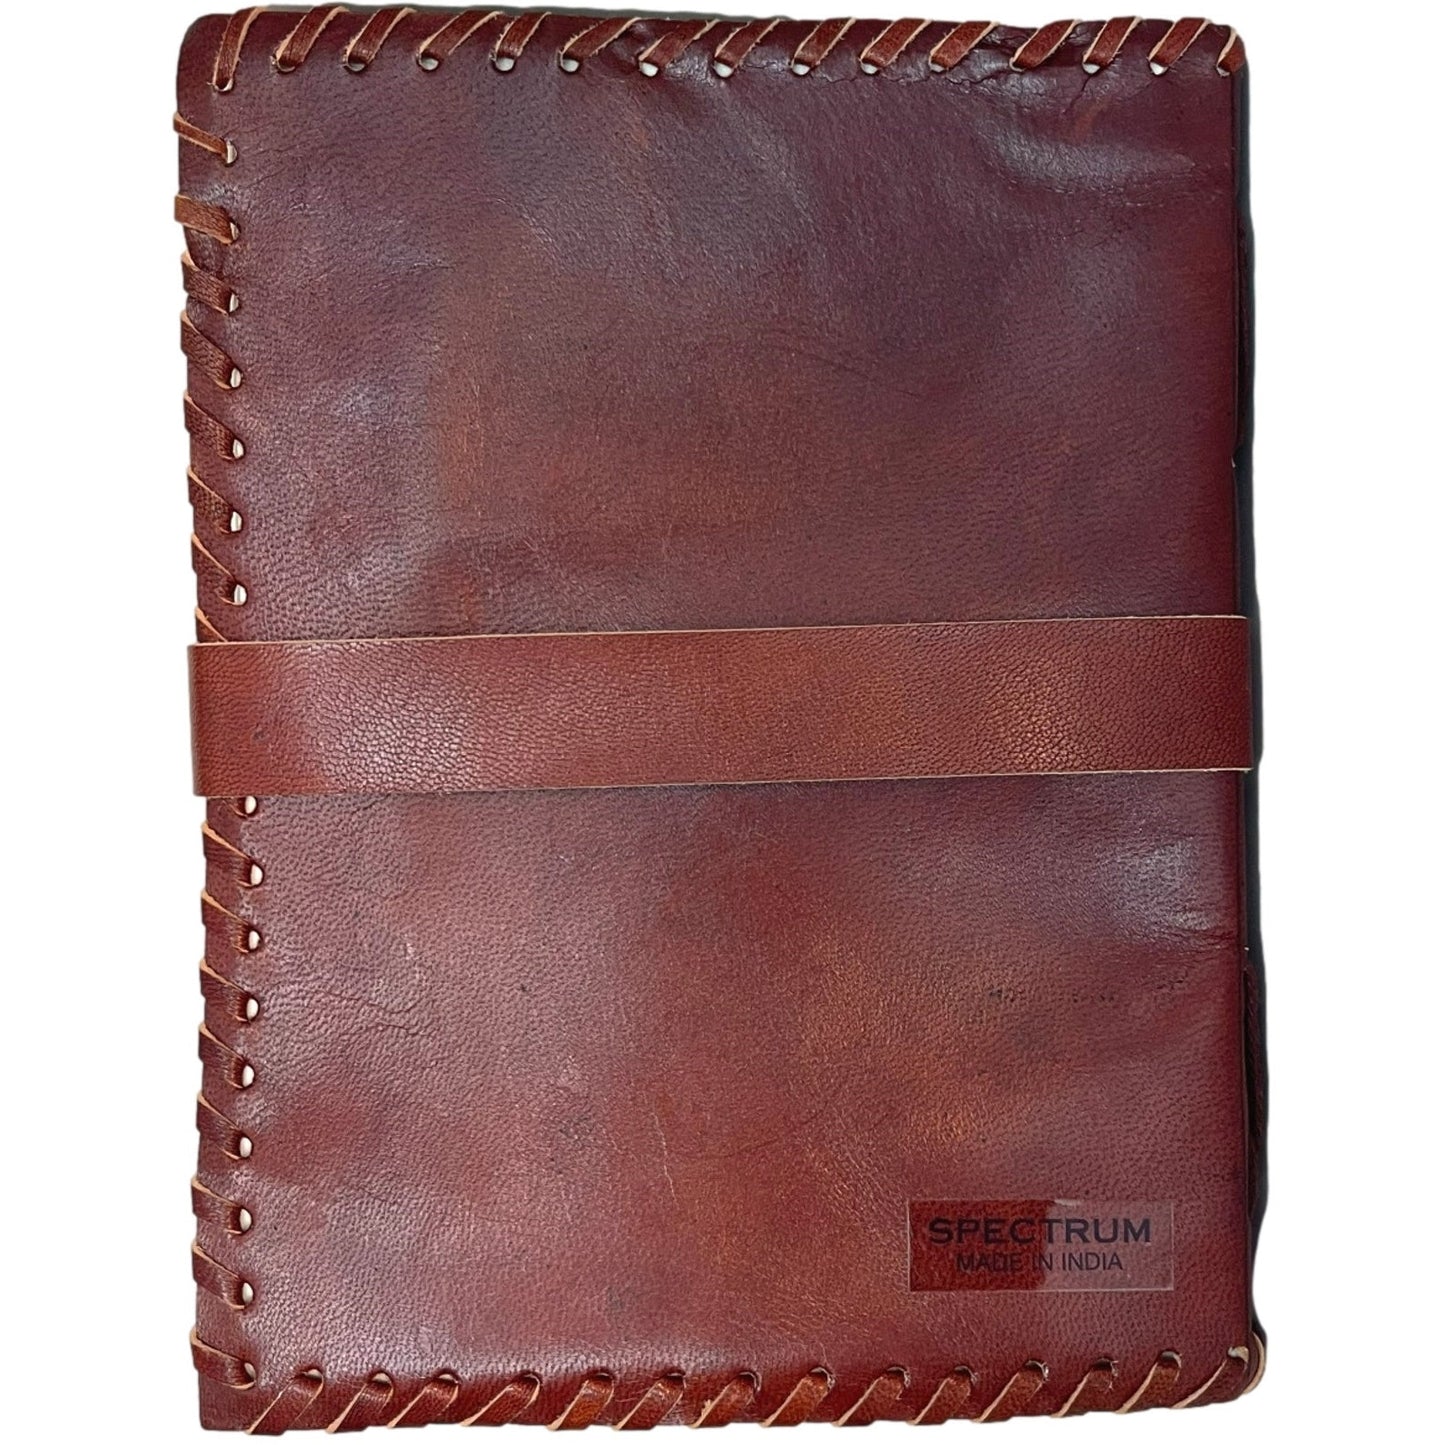 100% Leather Journal Embossed with Onyx Stone